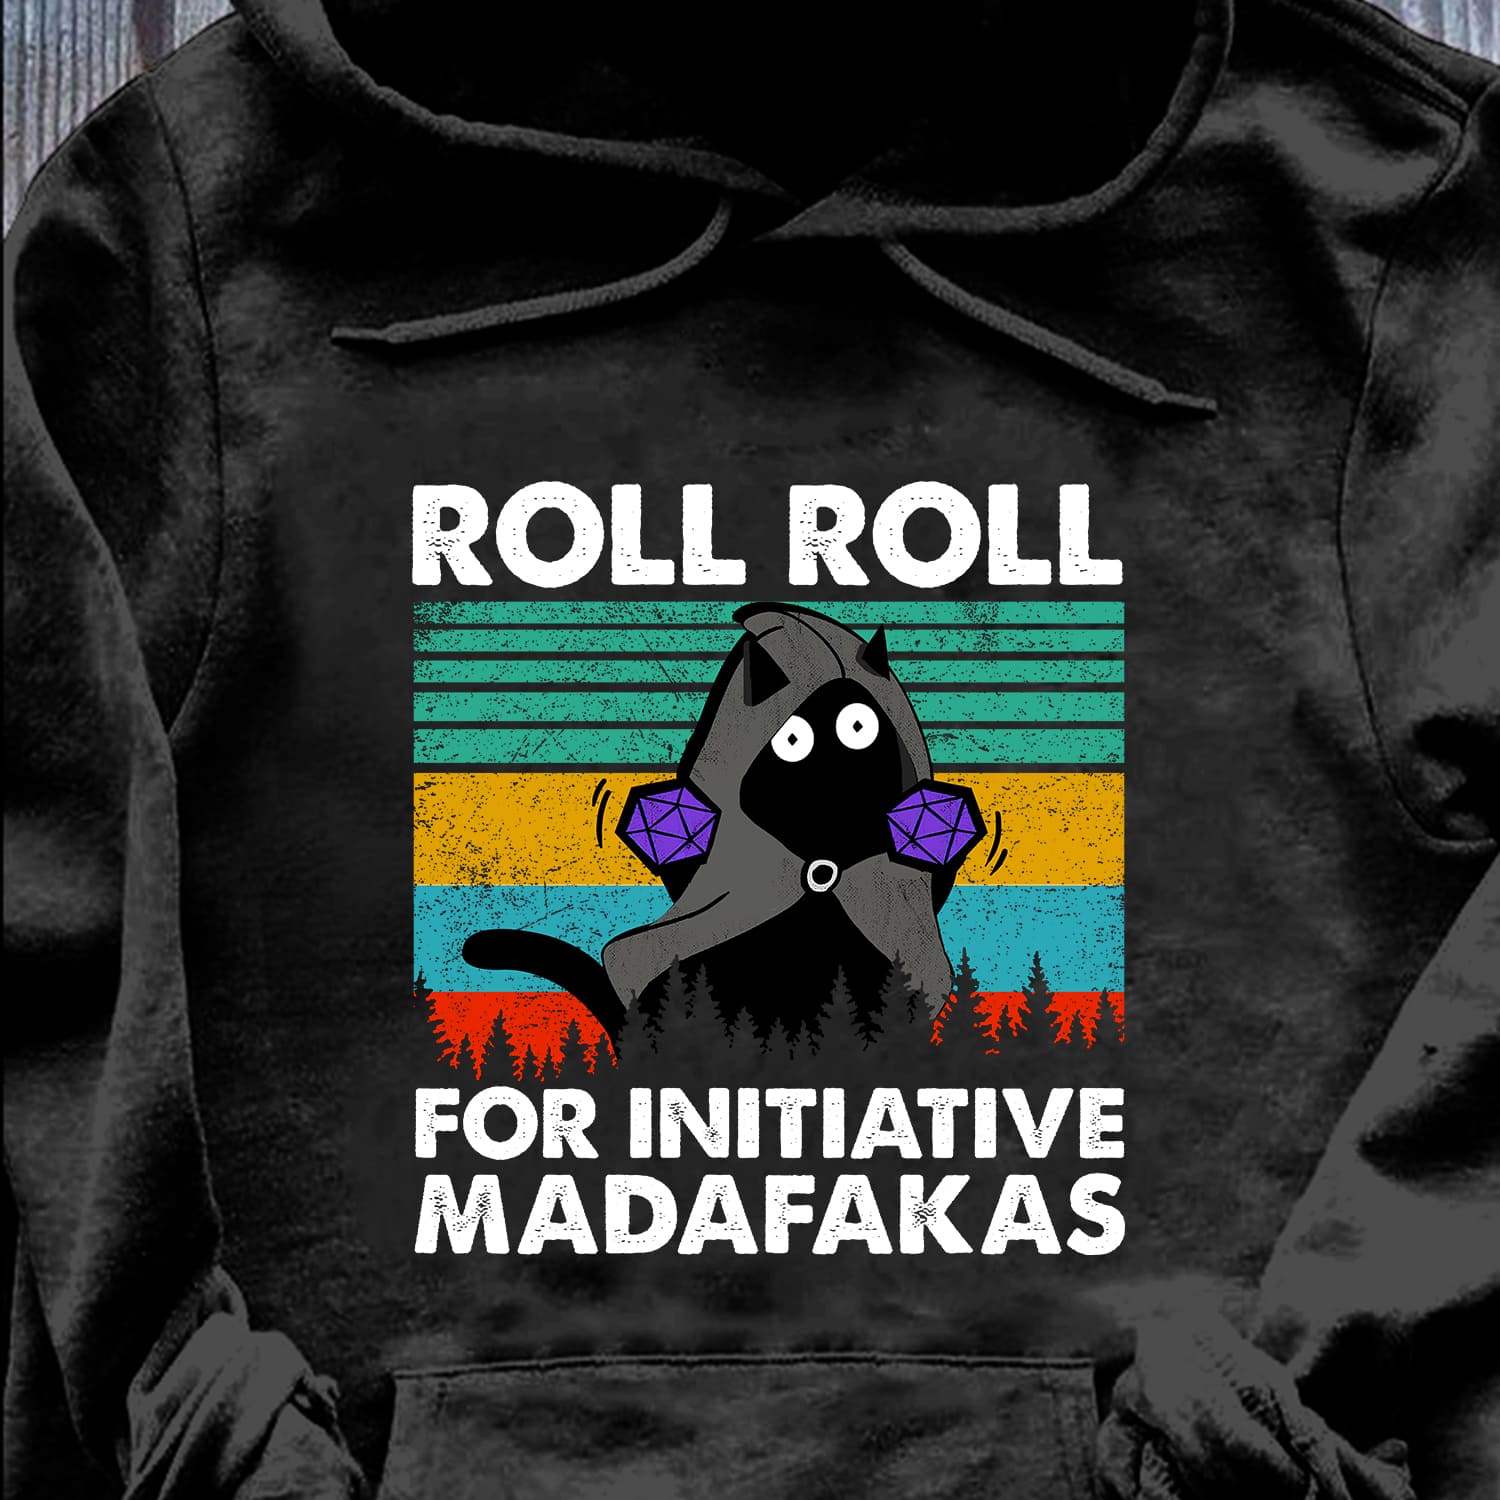 Dungeon Master Black Cat - Roll roll for initiative madafakas